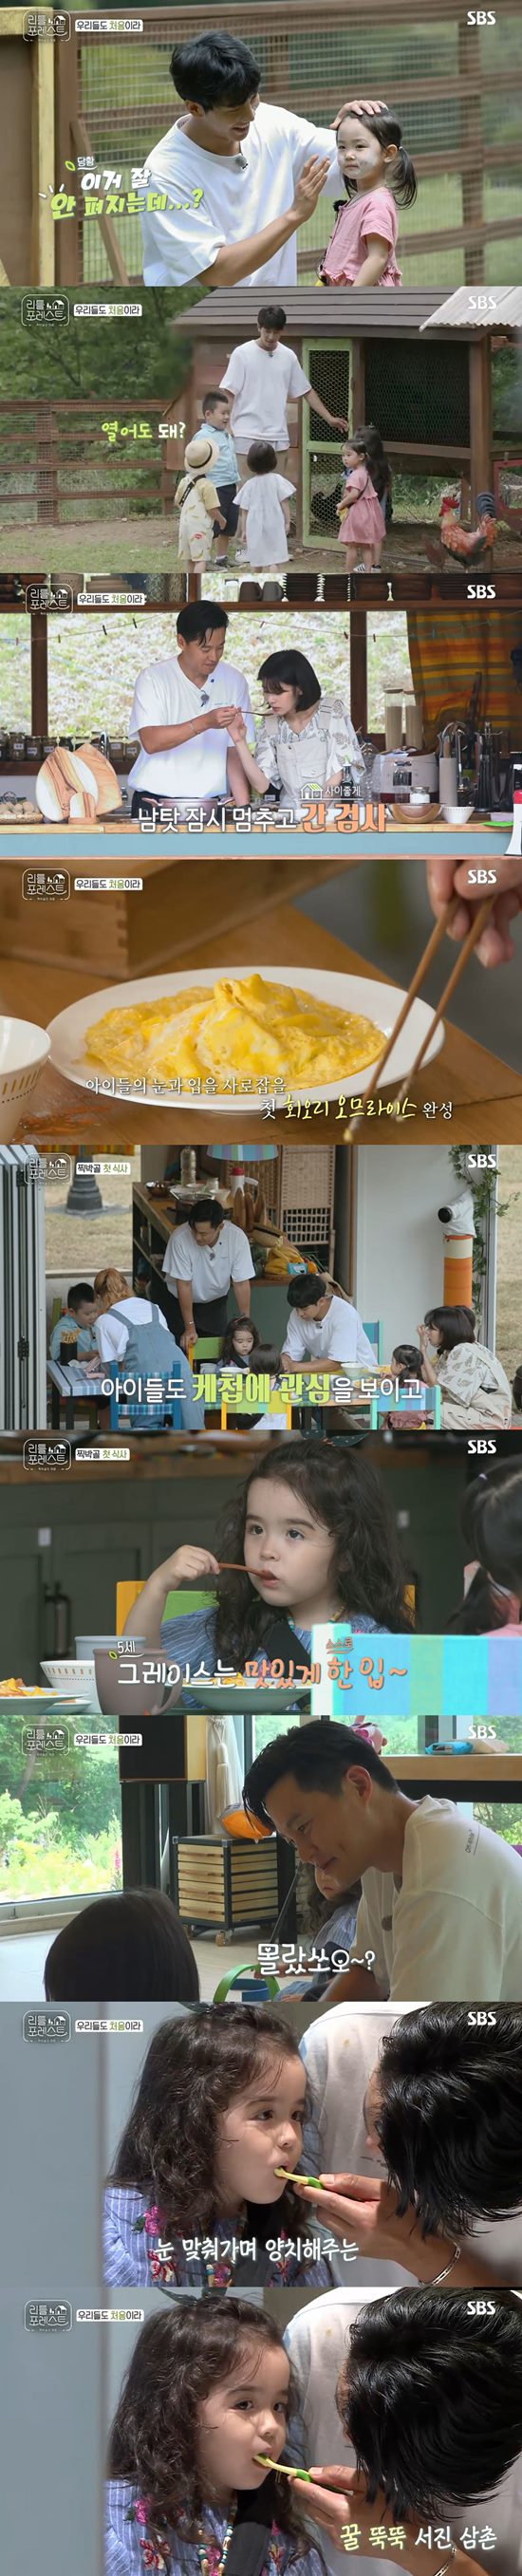 Lee Seo-jins dimples smile explodedOn the 13th SBS Little Forest, the first meeting of five children and four members of Lee Seo-jin, Lee Seung-gi, Park Na-rae and Jung So-min was revealed.Earlier, all five children who had raised expectations by entering the Ttakbangol, a caring house of Little Forest, appeared in the first broadcast.First Lee Seung-gi and Park Na-rae led the children to an animal farm in the twig.At the animal farm with rabbits, chickens, and chicks, the children, with the help of The Uncle, took out the eggs that the chicken had produced and fed them directly to the rabbits and became friends with the animals.But Park Na-rae, who has chicken phobias, was seen as stuck away from the animal farm without even entering it.Lee Seung-gis true poisonous child care has begun.Park Na-rae laughed as he stood outside the fence and cheered, watching Lee Seung-gi struggling with children alone in an animal farm.Lee Seo-jin and Jung So-min were busy preparing their first meal for children; the lunch menu of the day was a mortal menu whirlwind omraise, which Lee Seo-jin had learned in advance.Lee Seo-jin looked meticulous, not forgetting what mothers had asked for, but chopping and chopping up ingredients for children.In addition, he showed his aspect as a make-up main chef with a child cooking certificate by making egg whirls skillfully.After lunch preparation, the first meal with the children was a difficult mission for the novice carers.The members sweated to feed the children who were not accustomed to eating alone during lunch.Even after feeding the children, they could not eat properly because they were taking care of the children.In a completely different reality from the ideal that I had dreamed of, the members began to become less and less talkative.But there was a ray of light in the child-rearing of war. It was the childrens catastrophic cuteness.The members of The Uncle, the children who are looking for their aunts, did not lose their laughter even though they were tired.Lee Seo-jins sweetness toward children attracted attention on this day.Lee Seo-jin took off his feet in a cute chorus of Chikachika of the children who finished their meals and became a The delicate brush of her teeth at eye level in Brooke gave viewers a heartfelt look.The scene, in which Lee Seo-jins affection exploded, recorded the highest audience rating of 7.7% per minute, accounting for the best one minute.Meanwhile, Little Forest ranked first overall in drama, entertainment and cultural programs broadcast on Tuesday, recording 2.8% of the 2049 target audience rating (based on Nielsen Korea/2 parts), which is an important indicator of major advertising officials.The average audience rating of households in the Seoul metropolitan area was 6.1%, the highest audience rating per minute soared to 7.7%.Photo = SBS Broadcasting Screen